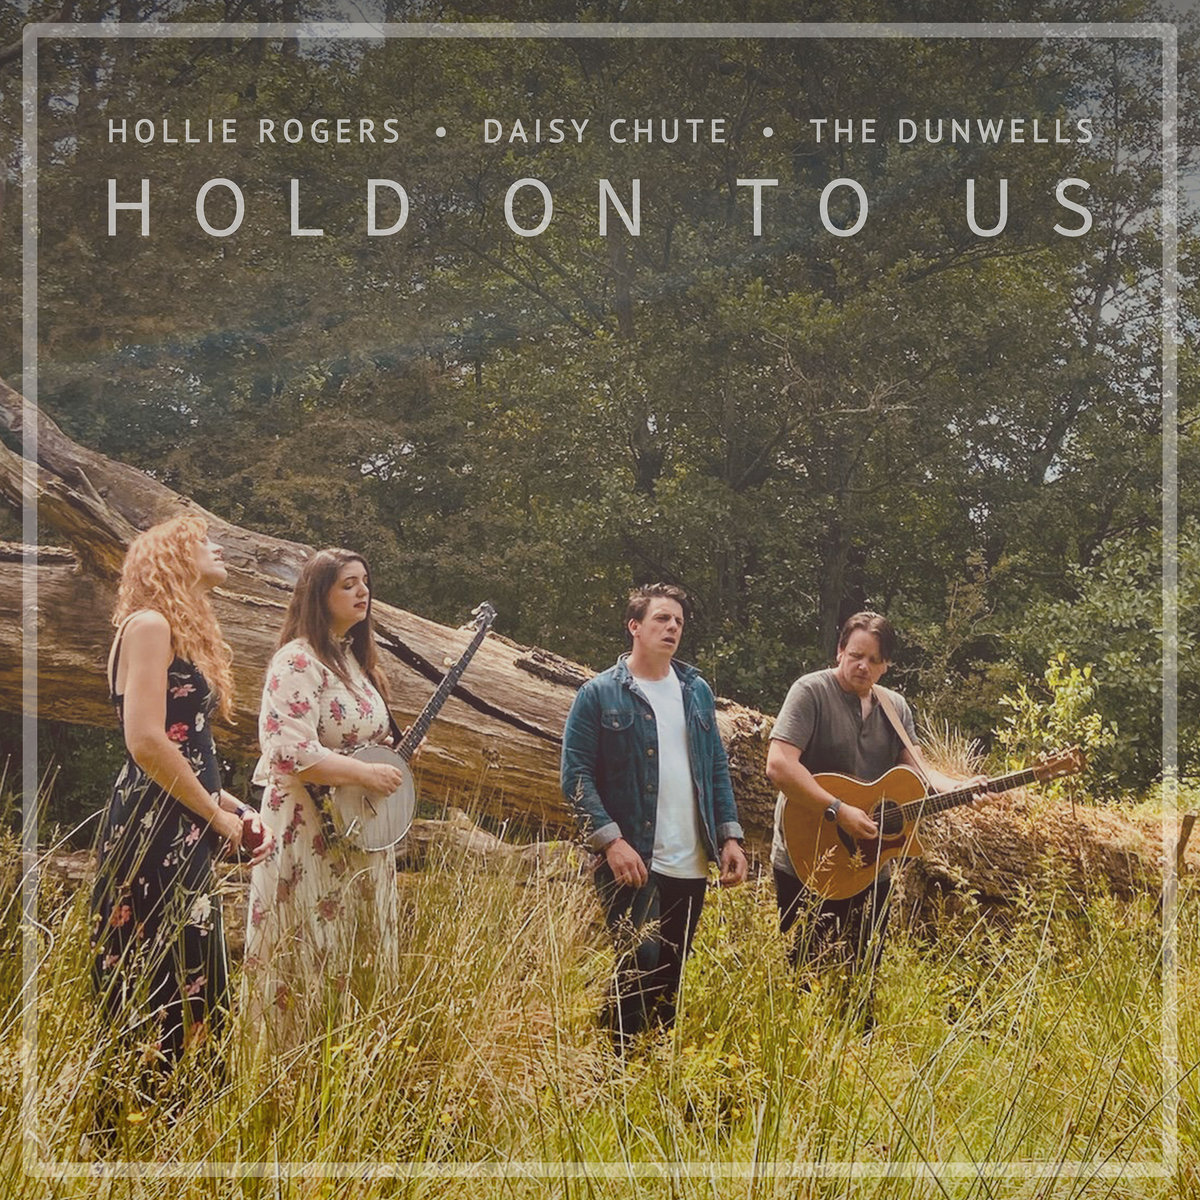 Hold On To Us, Daisy Chute, The Dunwells and Hollie Rogers